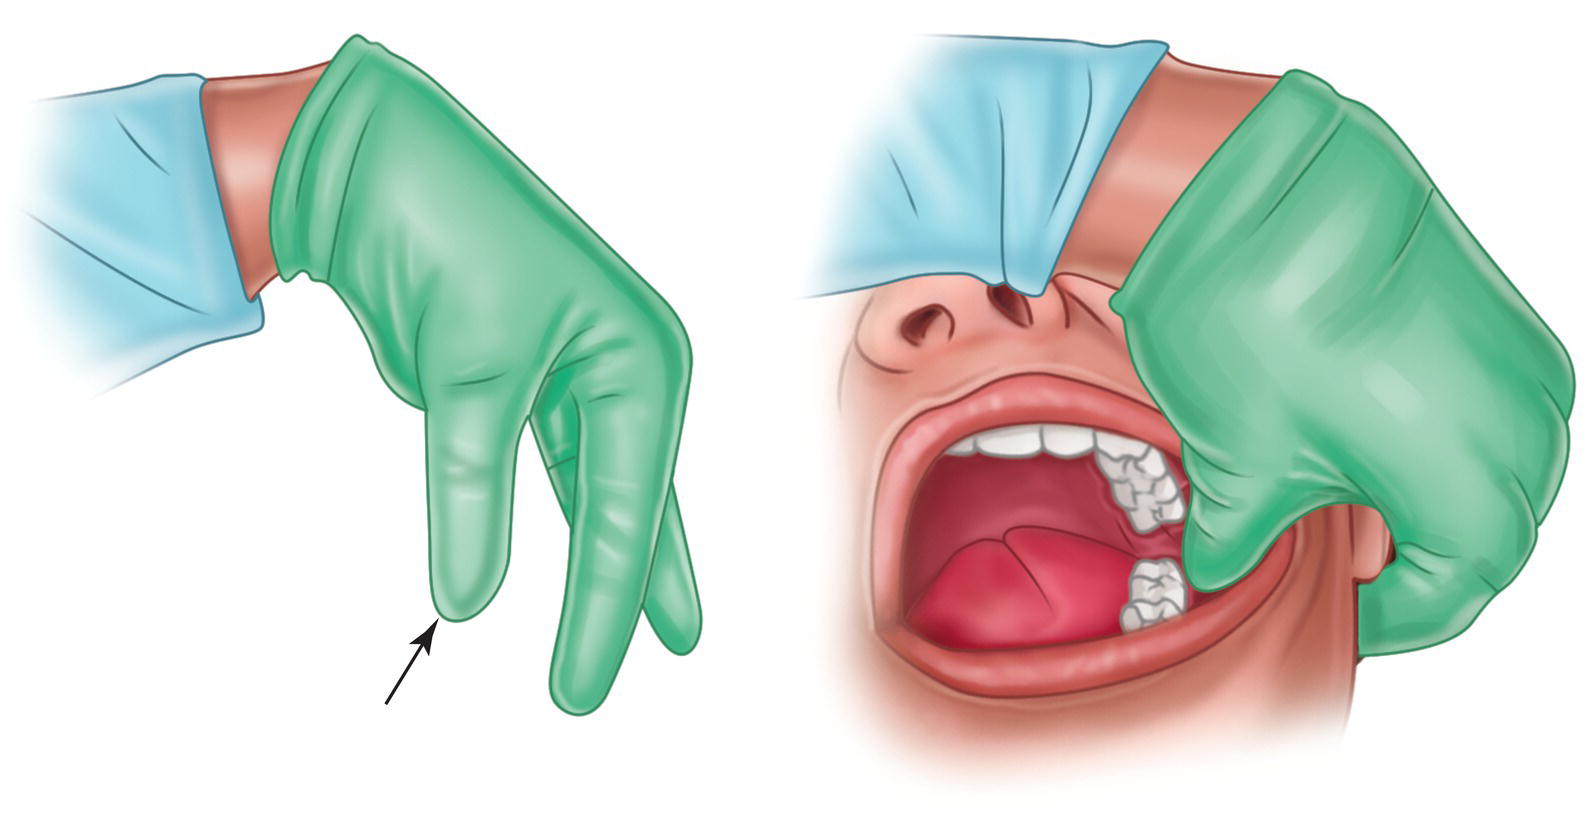 An illustration of bending the thumb and index finger and pulling the patient's cheek with the thumb.